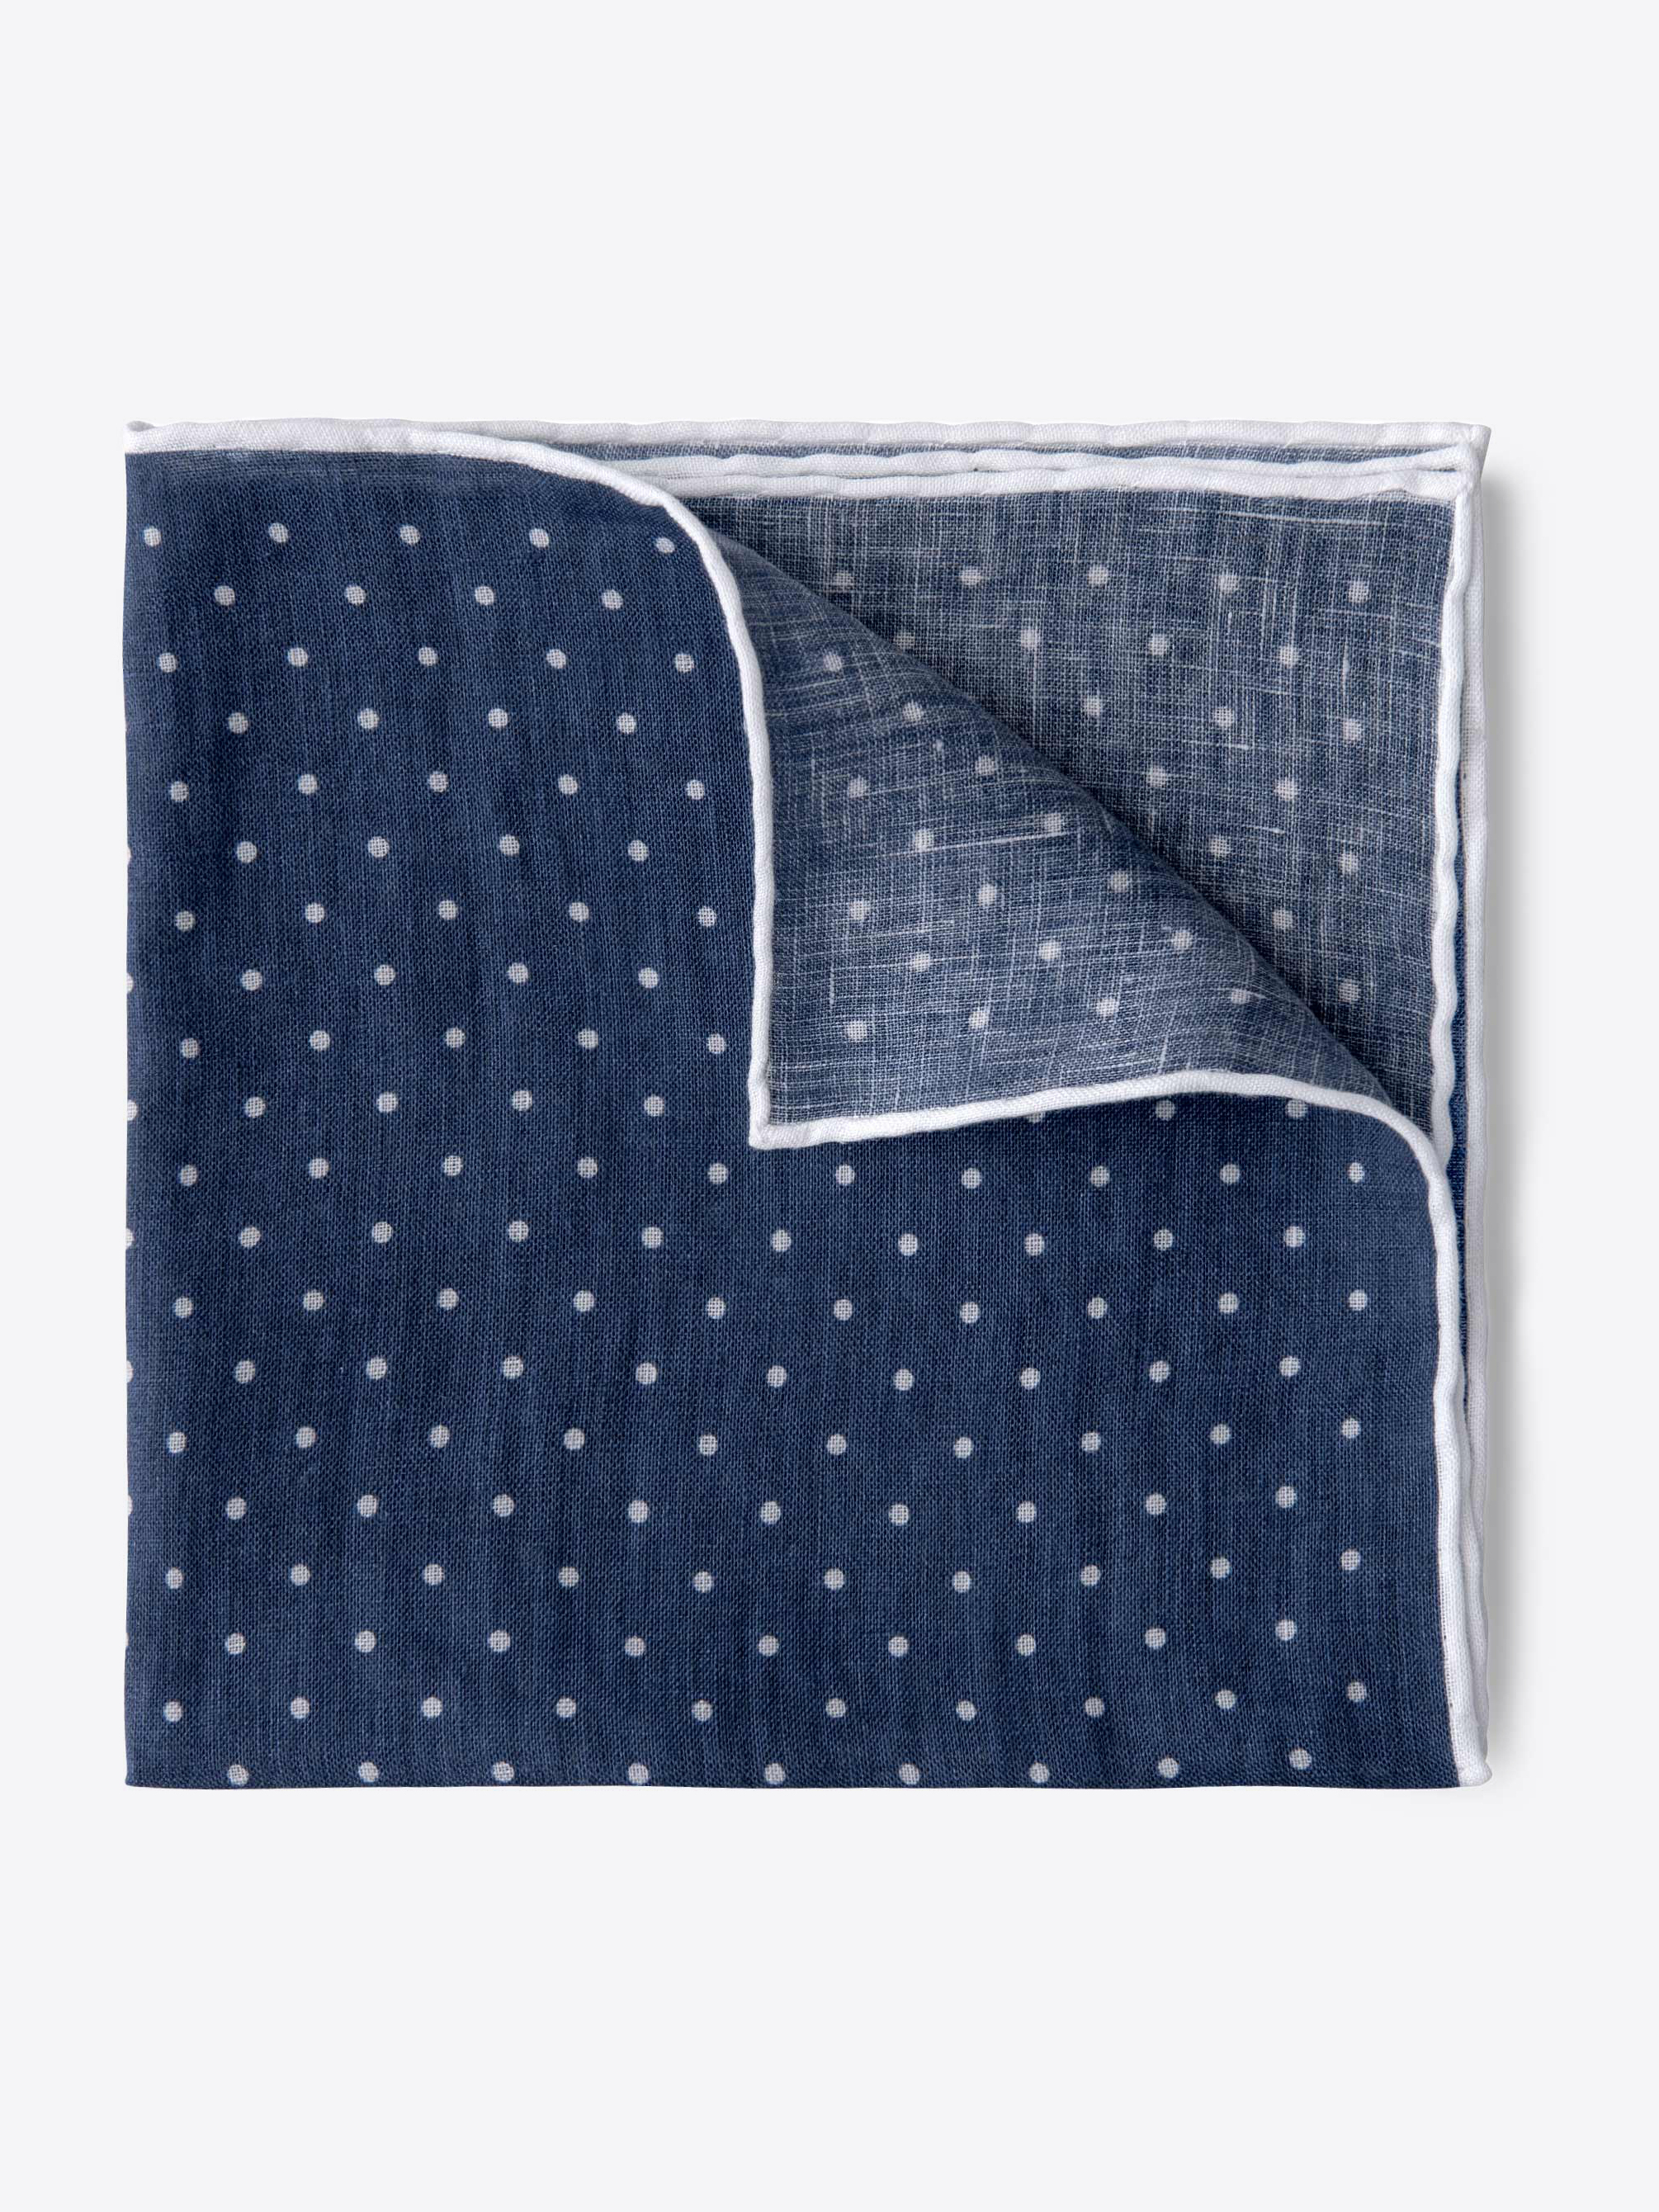 Zoom Image of Faded Navy and White Dot Print Linen Pocket Square